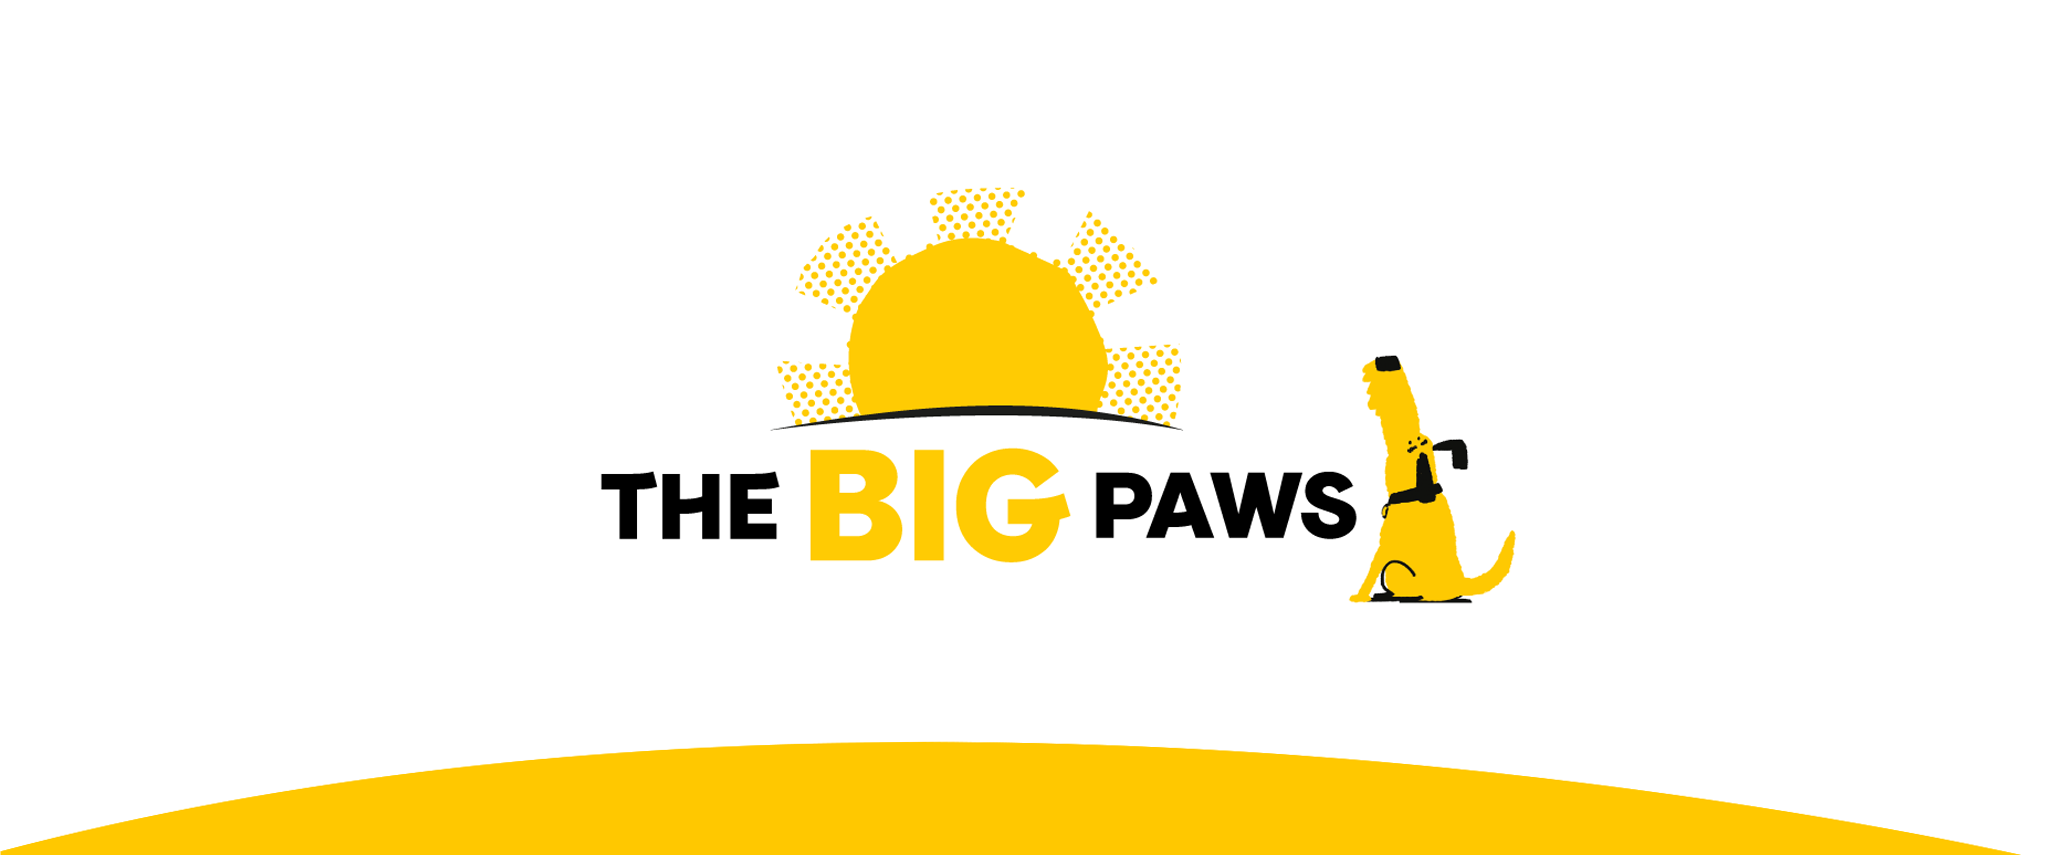 The Big Paws